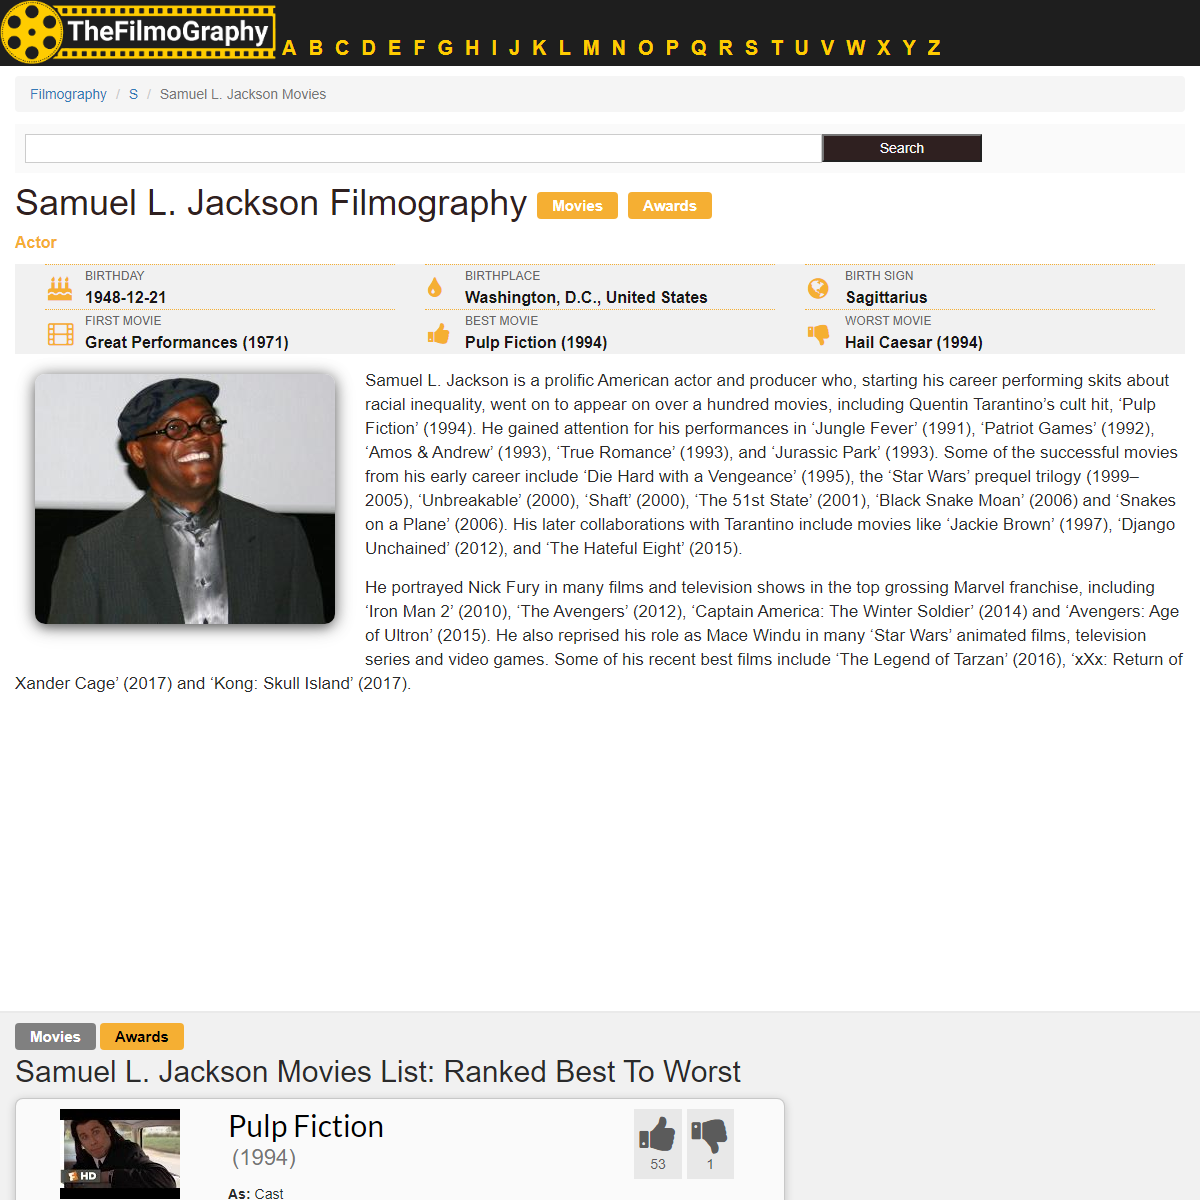 A complete backup of https://www.thefilmography.com/samuel-l-jackson-5135.php